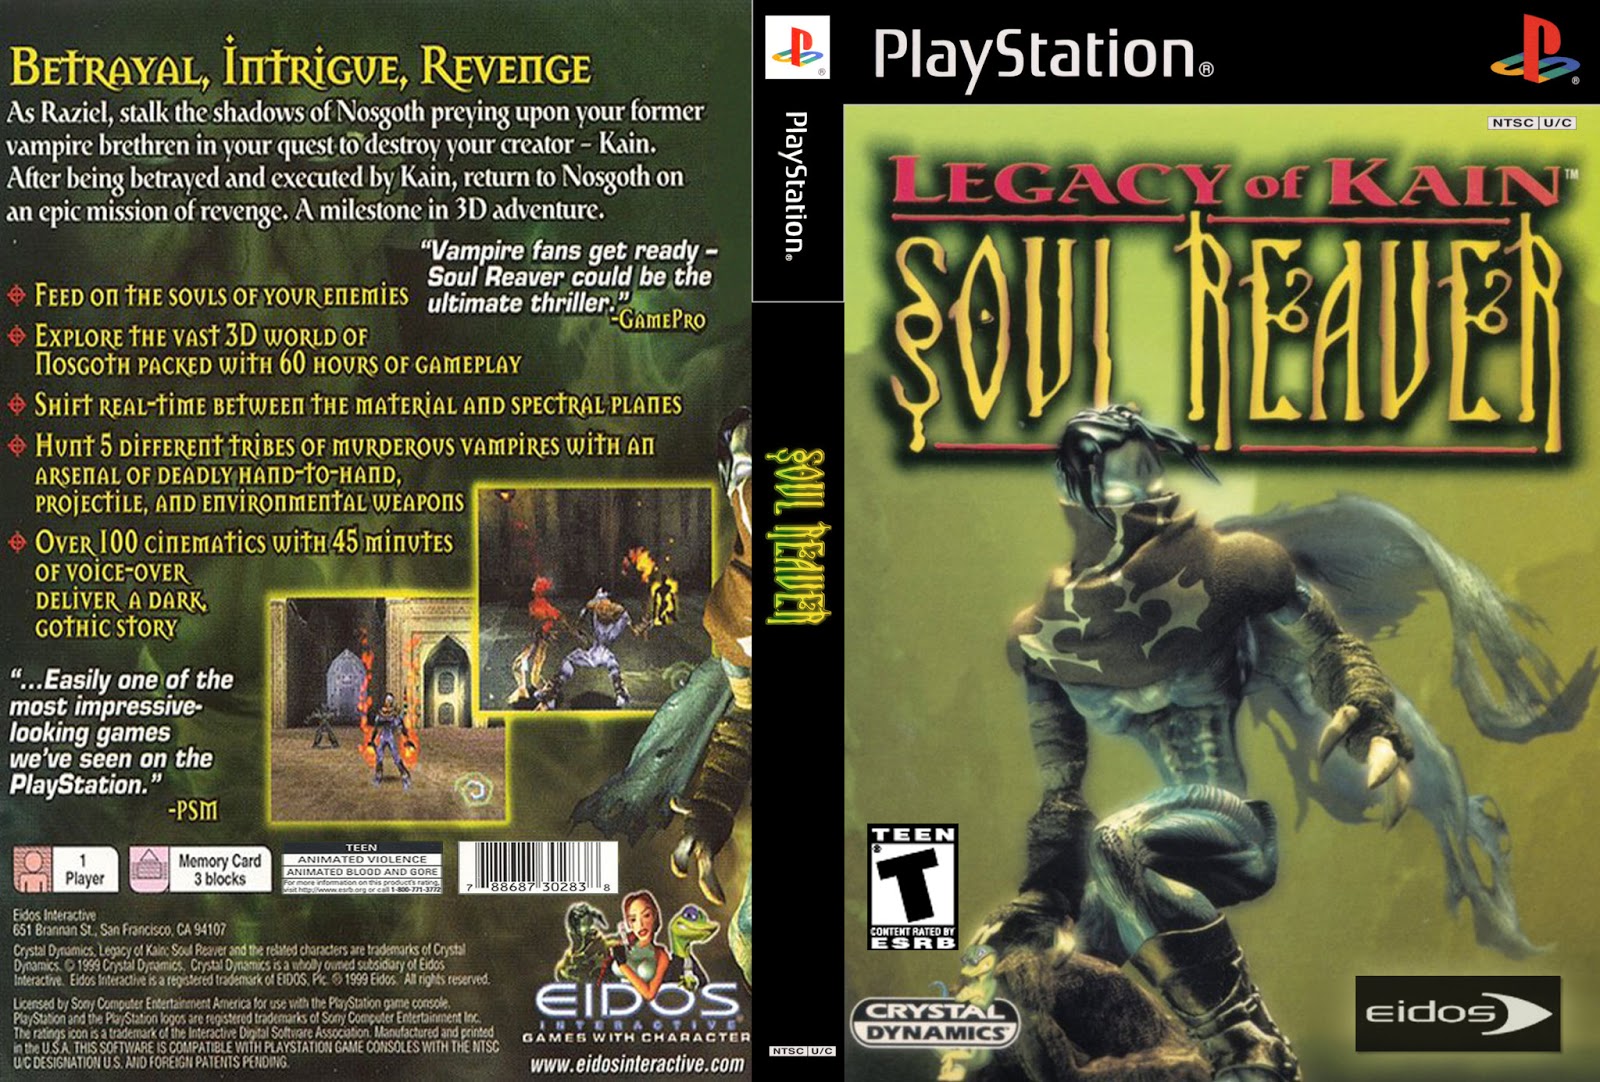 Soul ps1. Soul Reaver ps1 Cover. Legacy of Kain Soul Reaver ps1. Legacy of Kain Soul Reaver ps1 обложка. Legacy of Kain ps1.